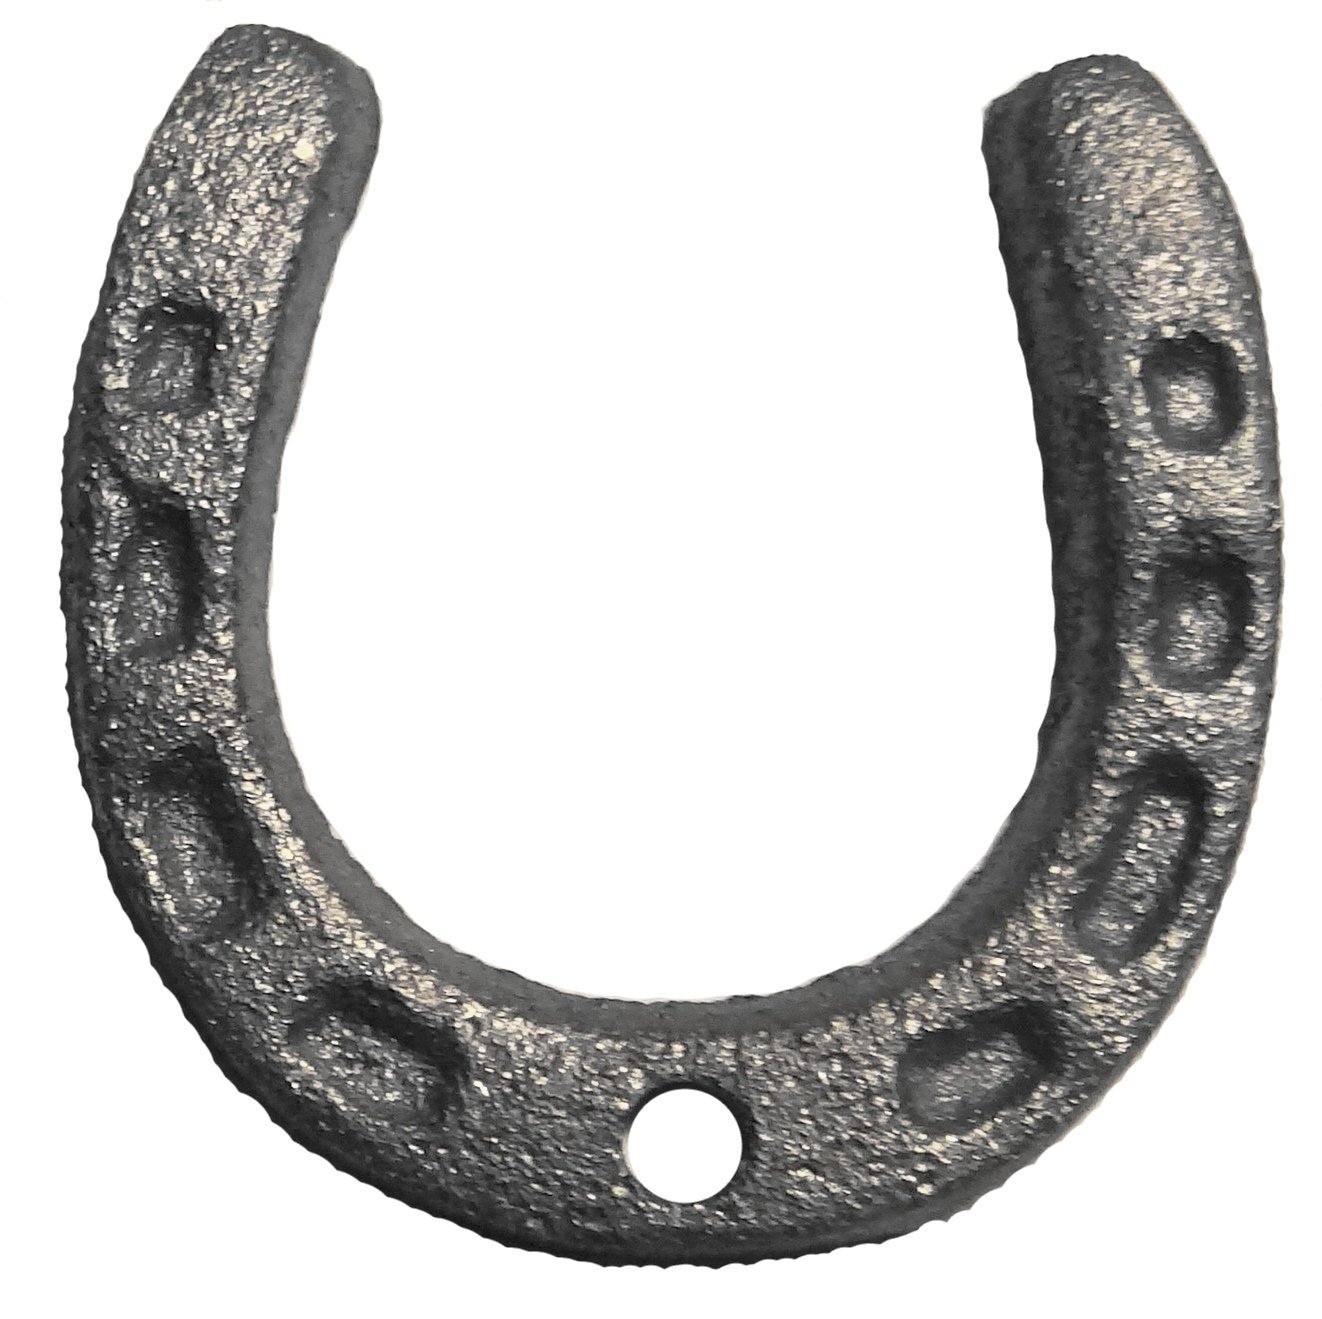 10pc Lot Tiny Cast Iron Horseshoes for Crafts Decorating Party Favors Weddings or for Good Luck